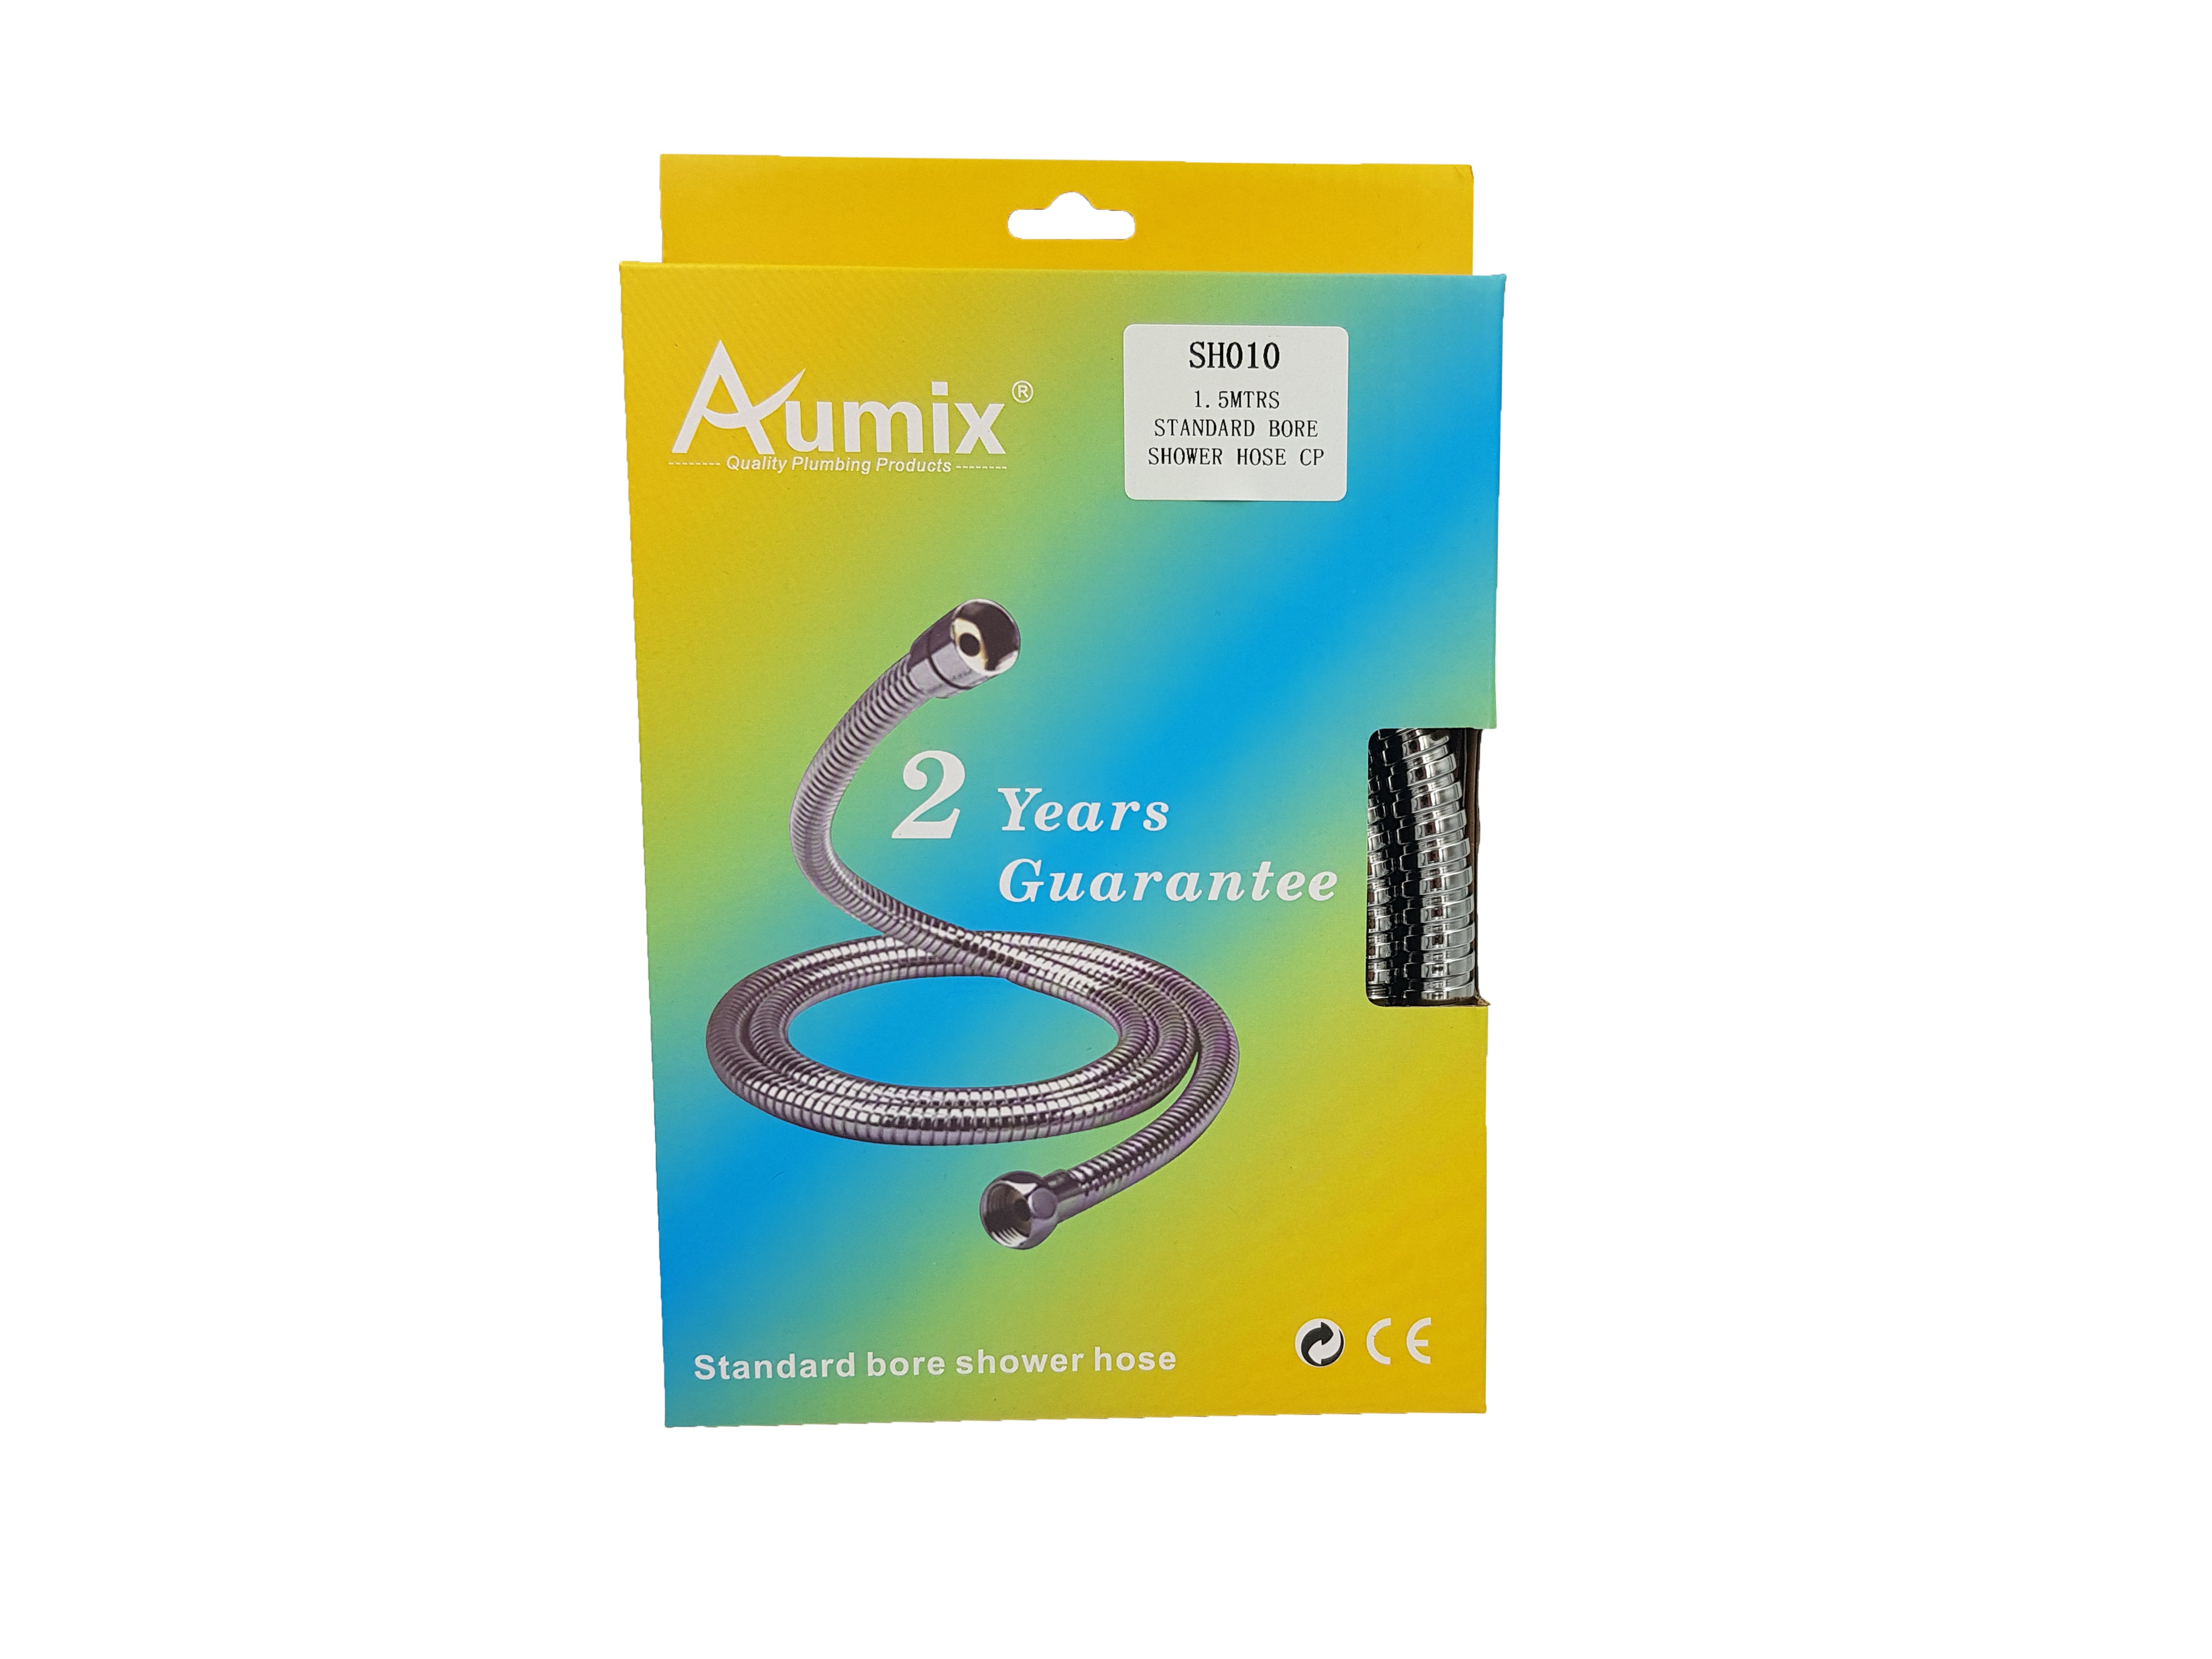 Aumix 1.5 Metres Replacement Shower Hose Standard Bore Stainless Steel Anti-Kink Double Lock Chrome Plated